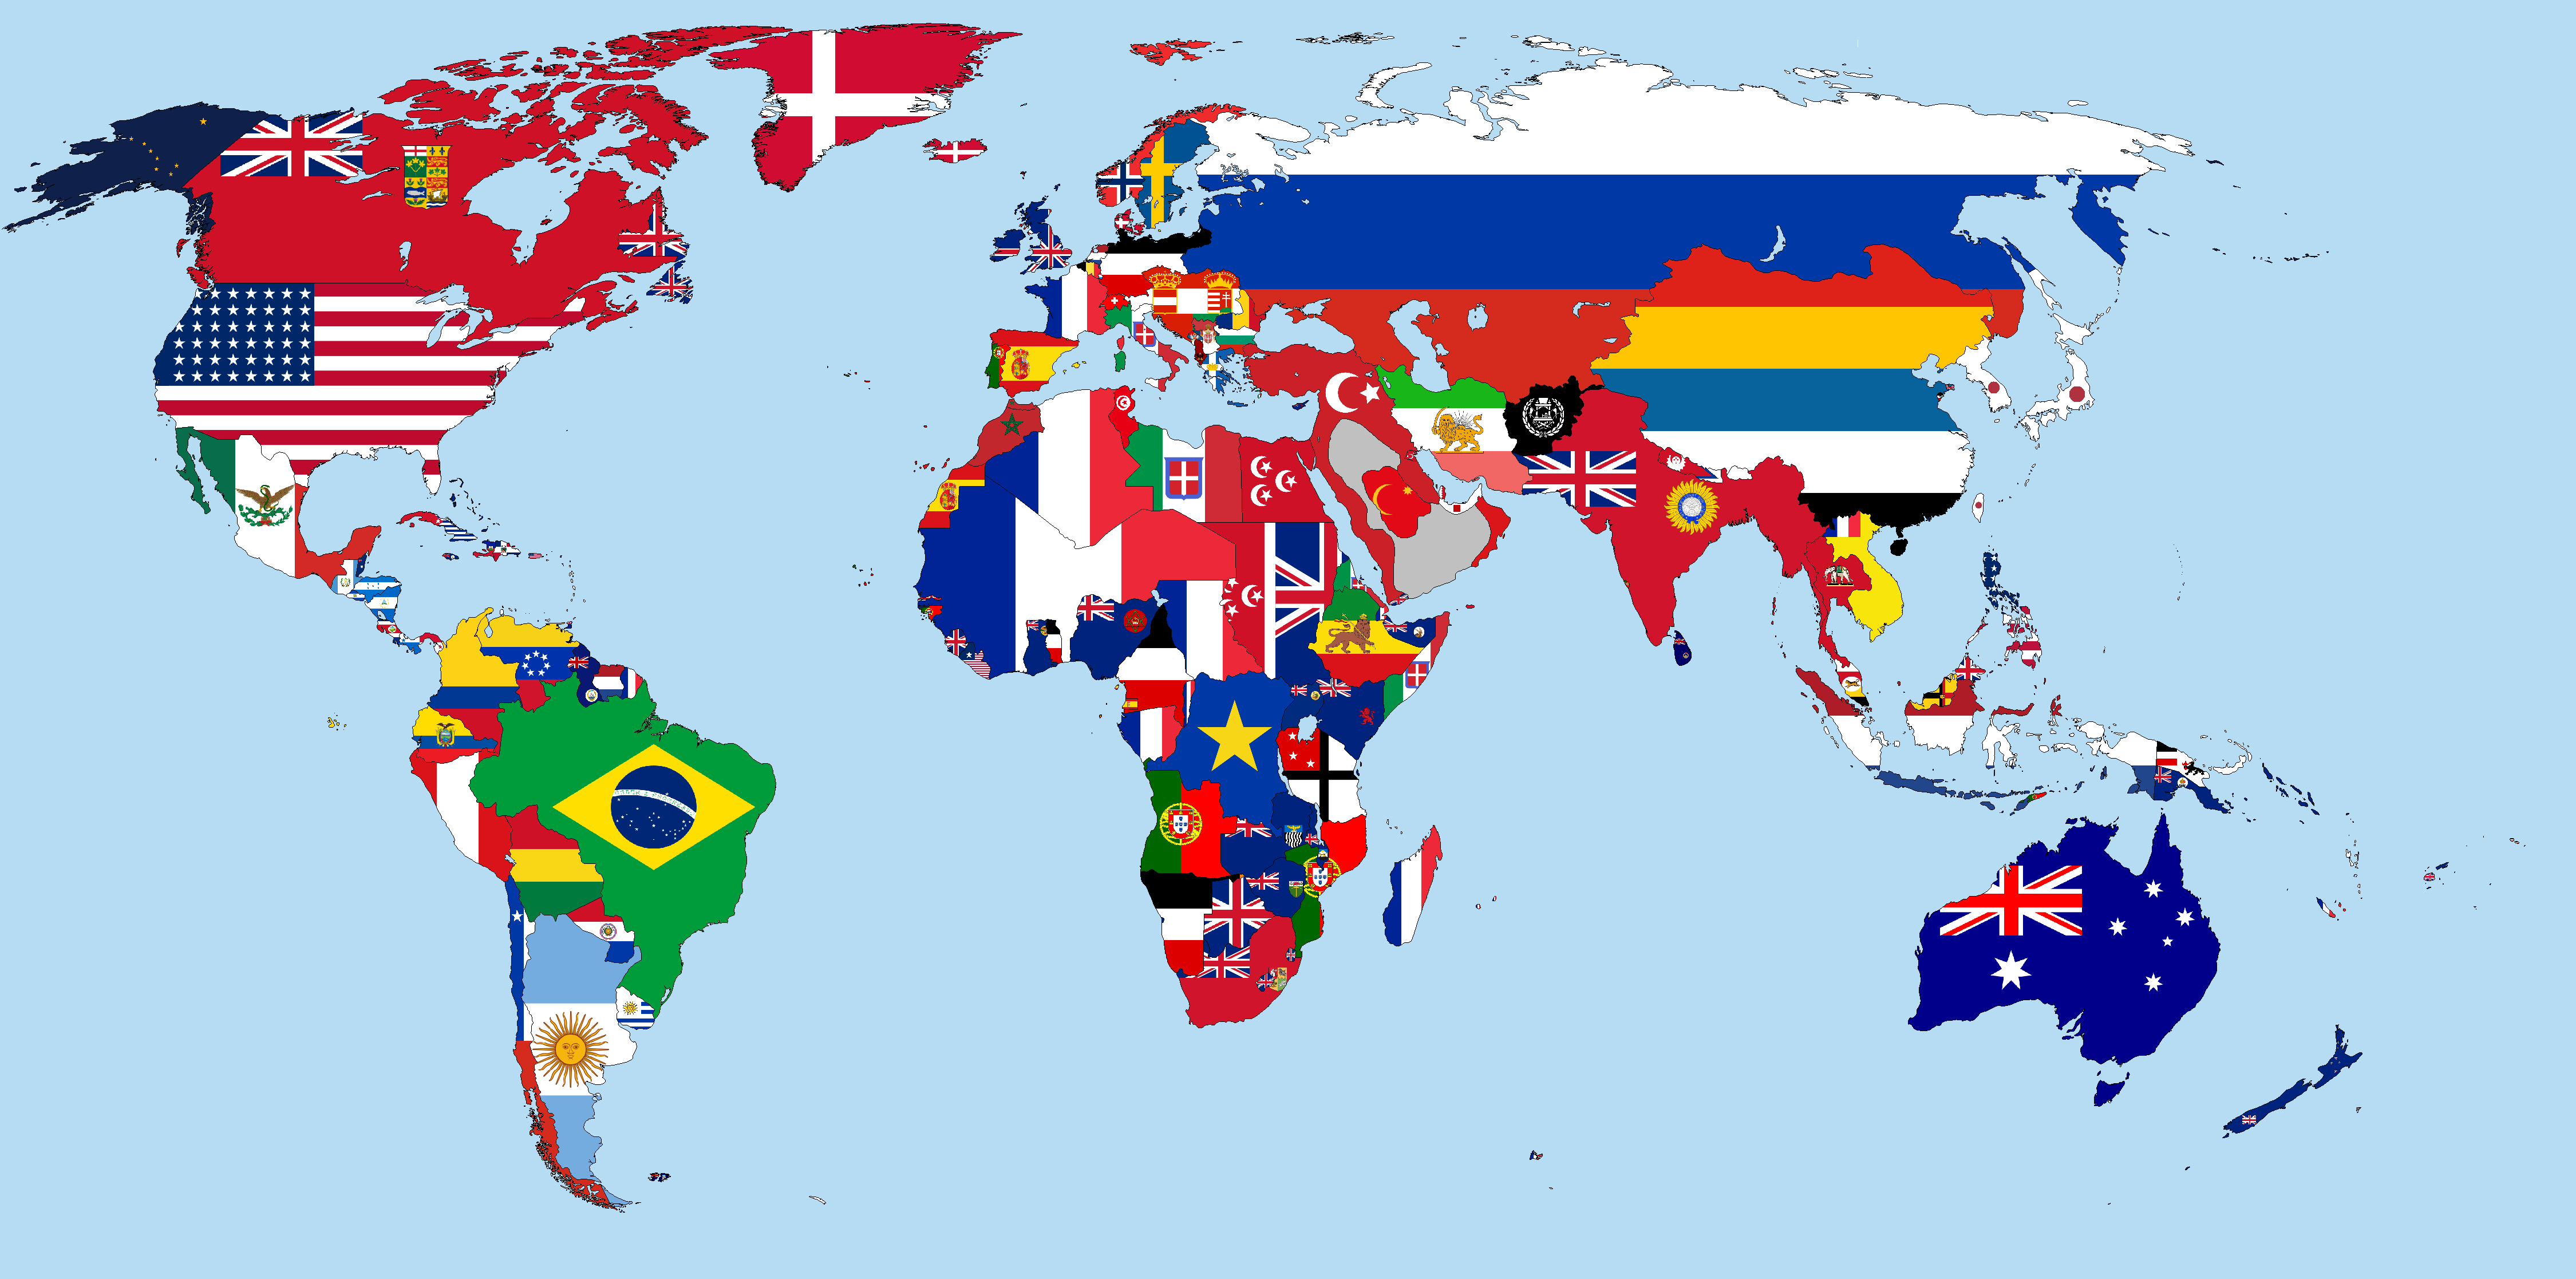 File:Flag-map of 1914.PNG - Wikimedia Commons